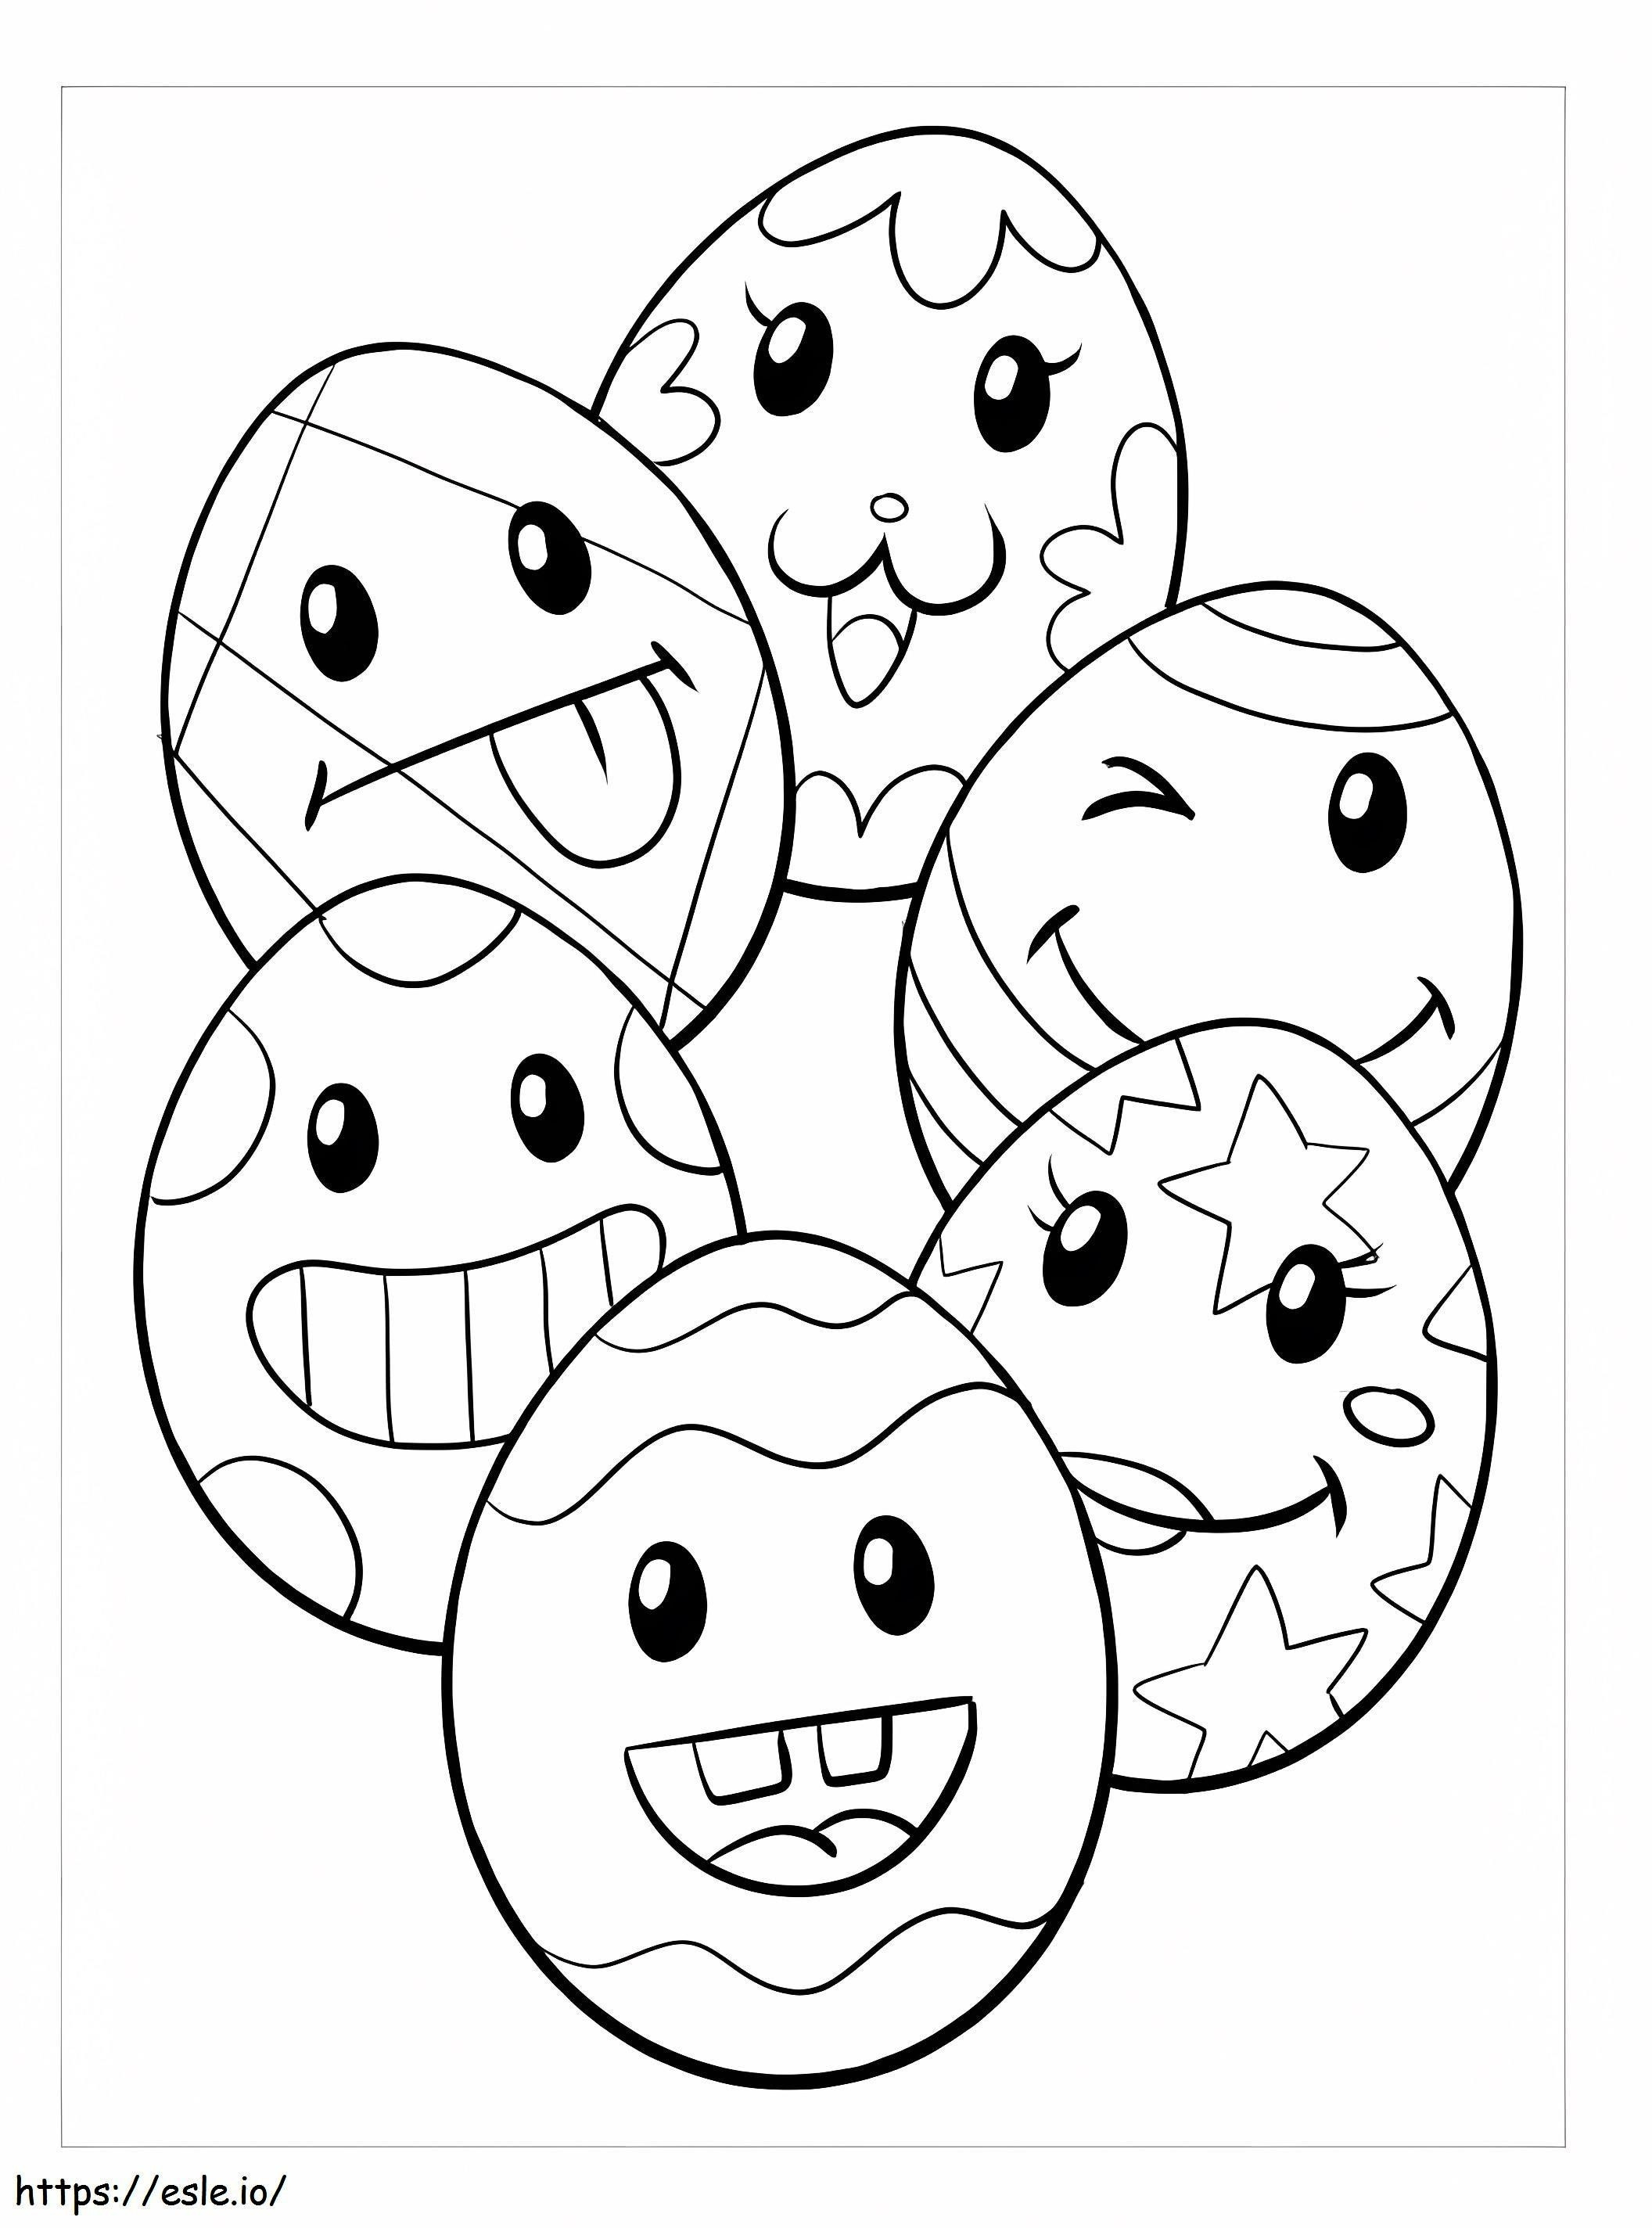 Six Cartoon Easter Eggs coloring page